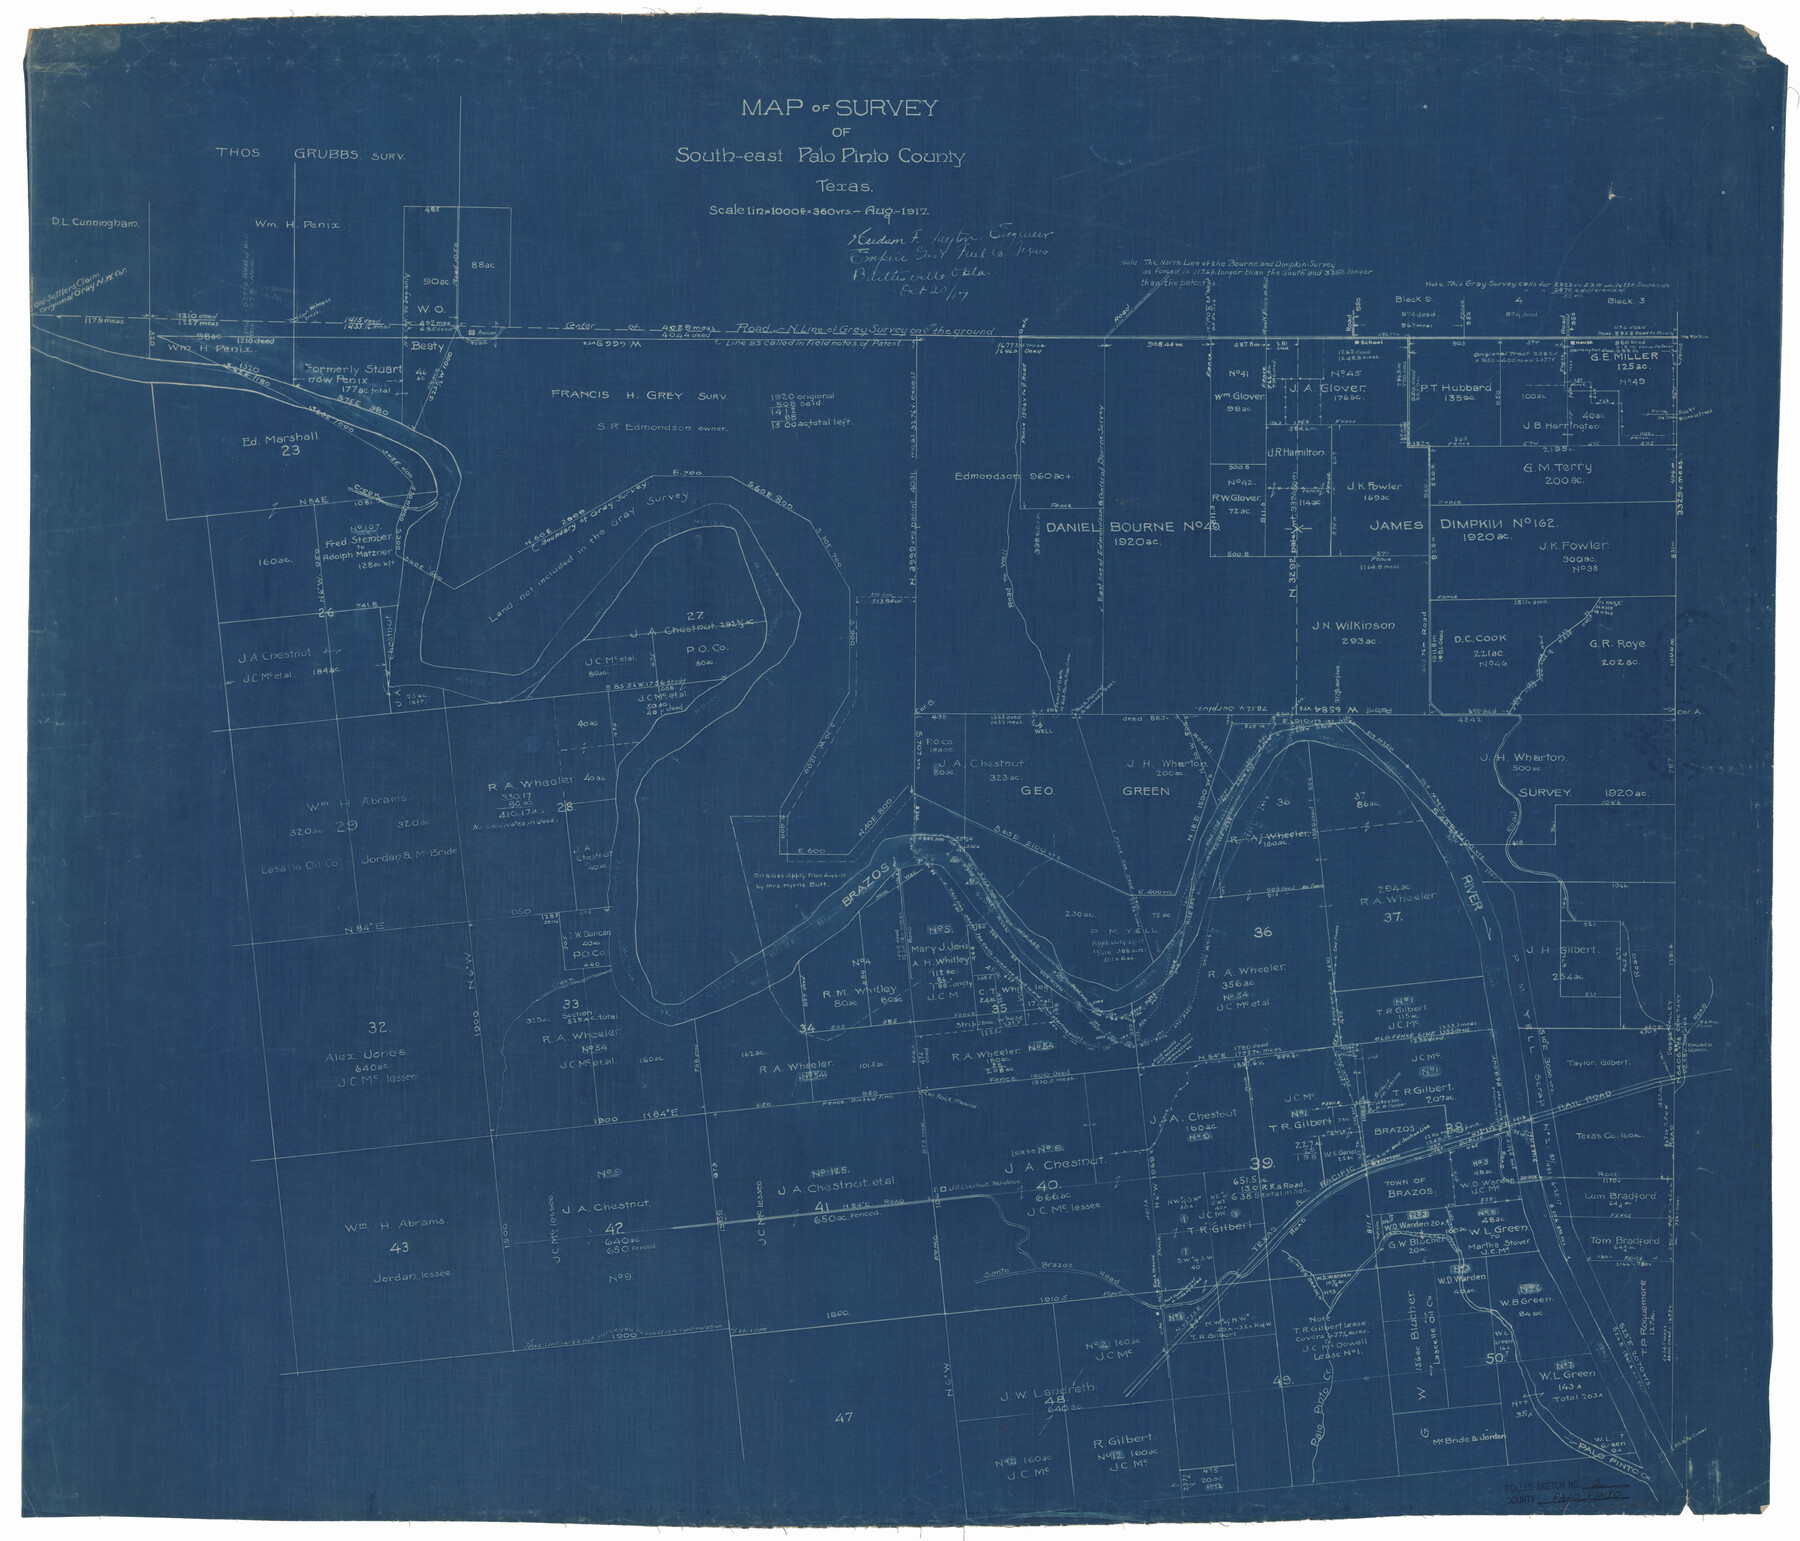 9669, Palo Pinto County Rolled Sketch 2, General Map Collection